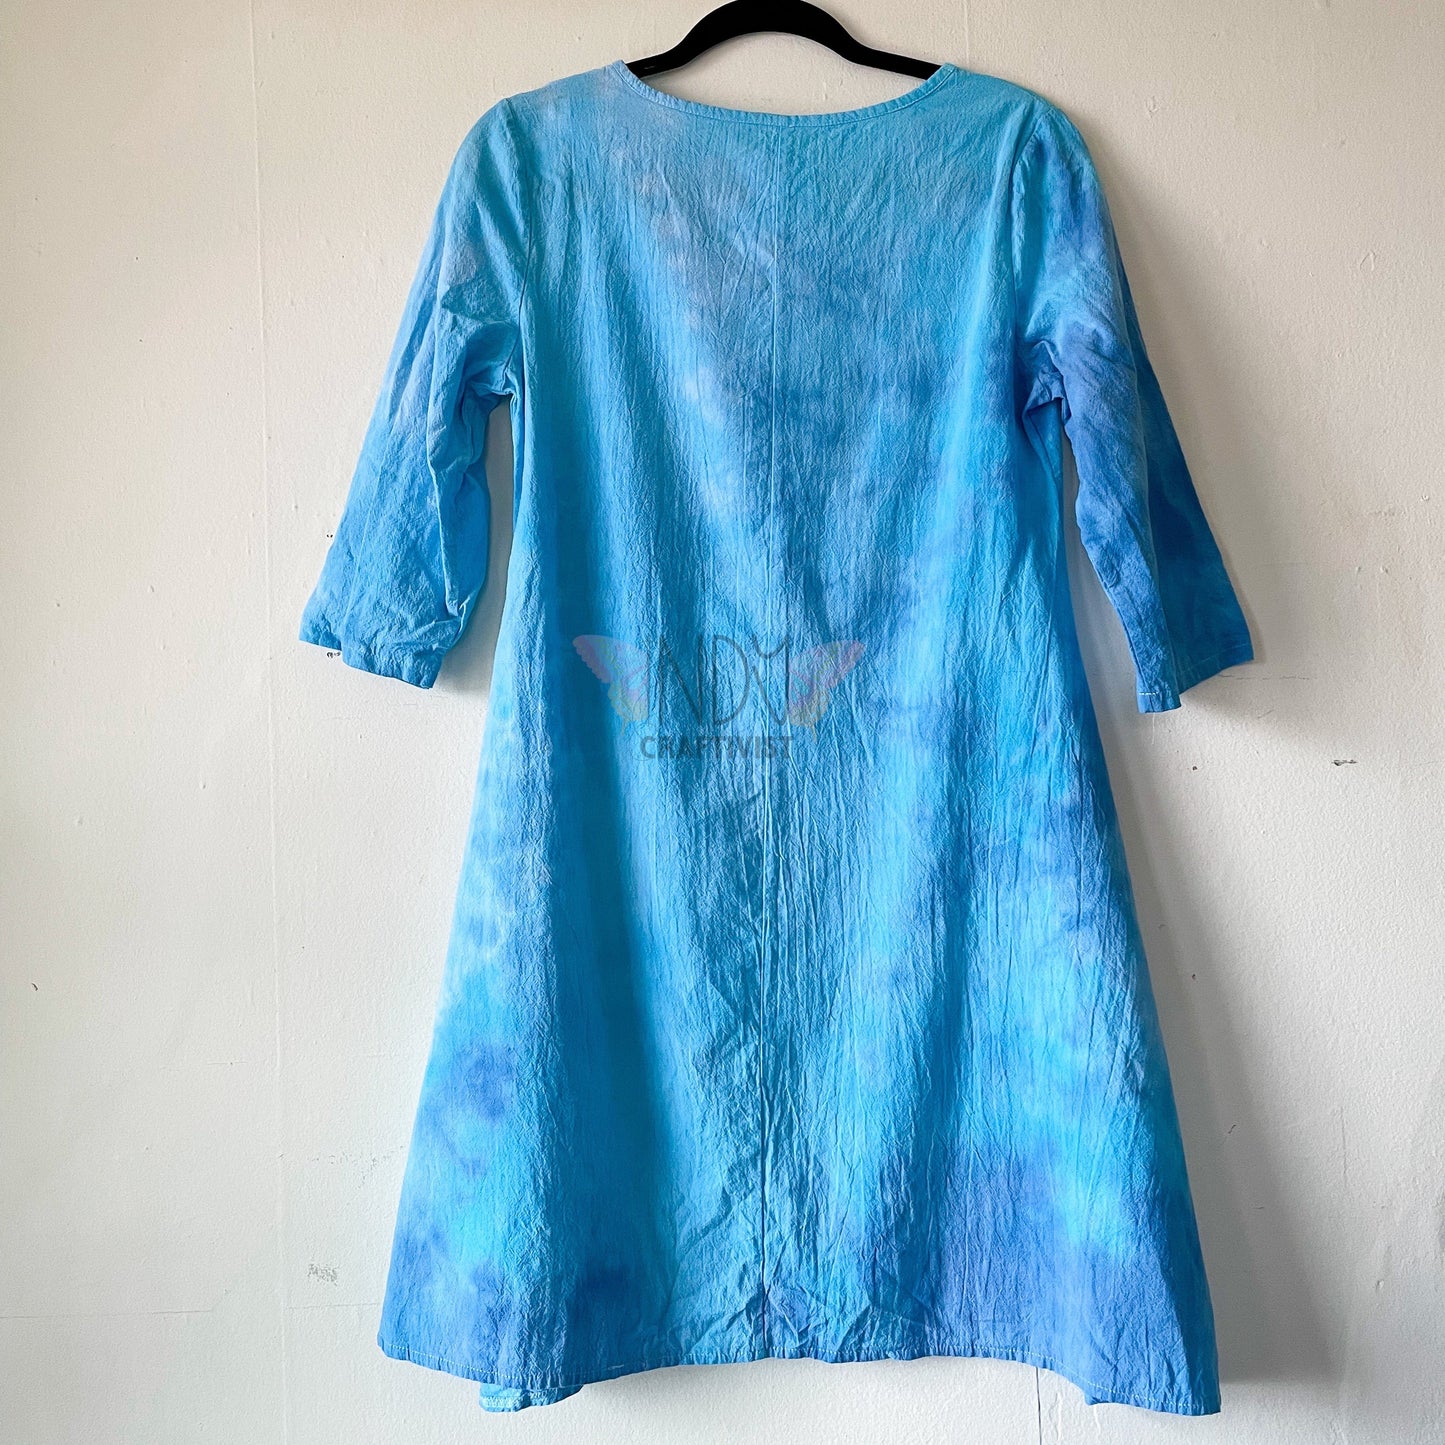 Adult Small Upcycled Tie Dye Dress